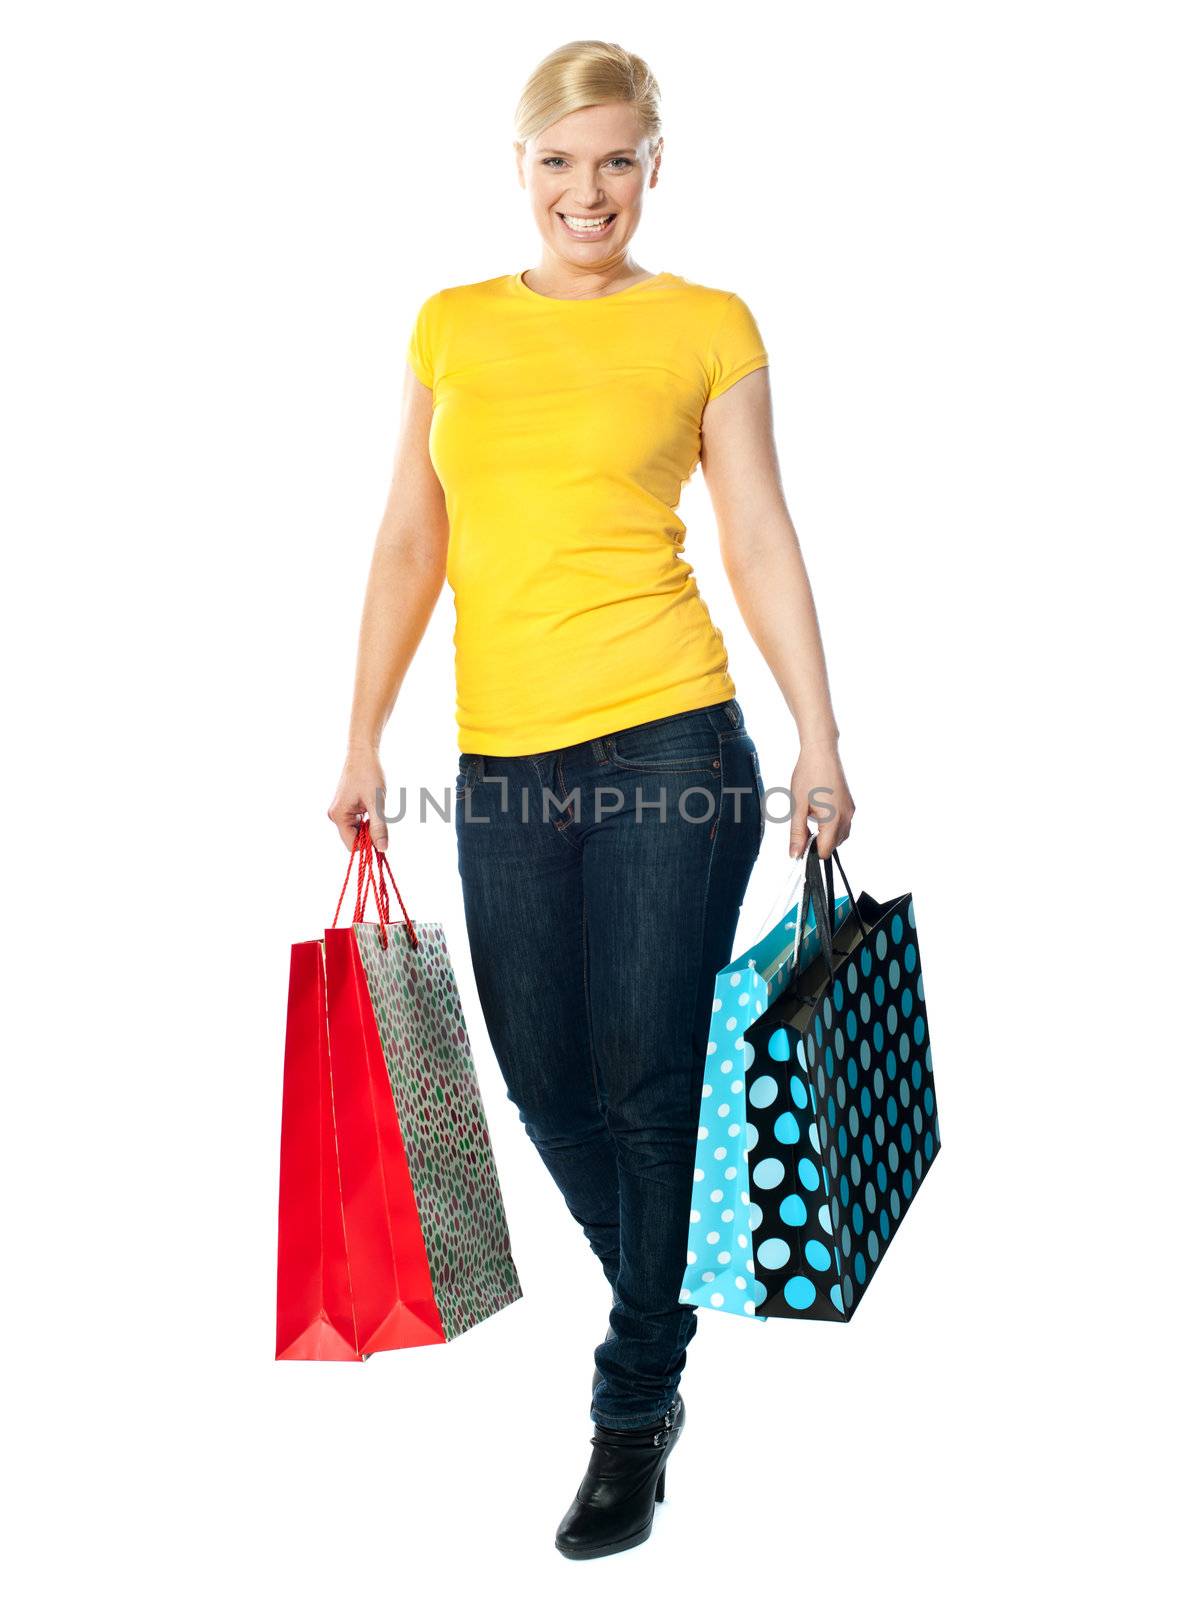 Attractive girl carrying colourful shopping bags, walking pose